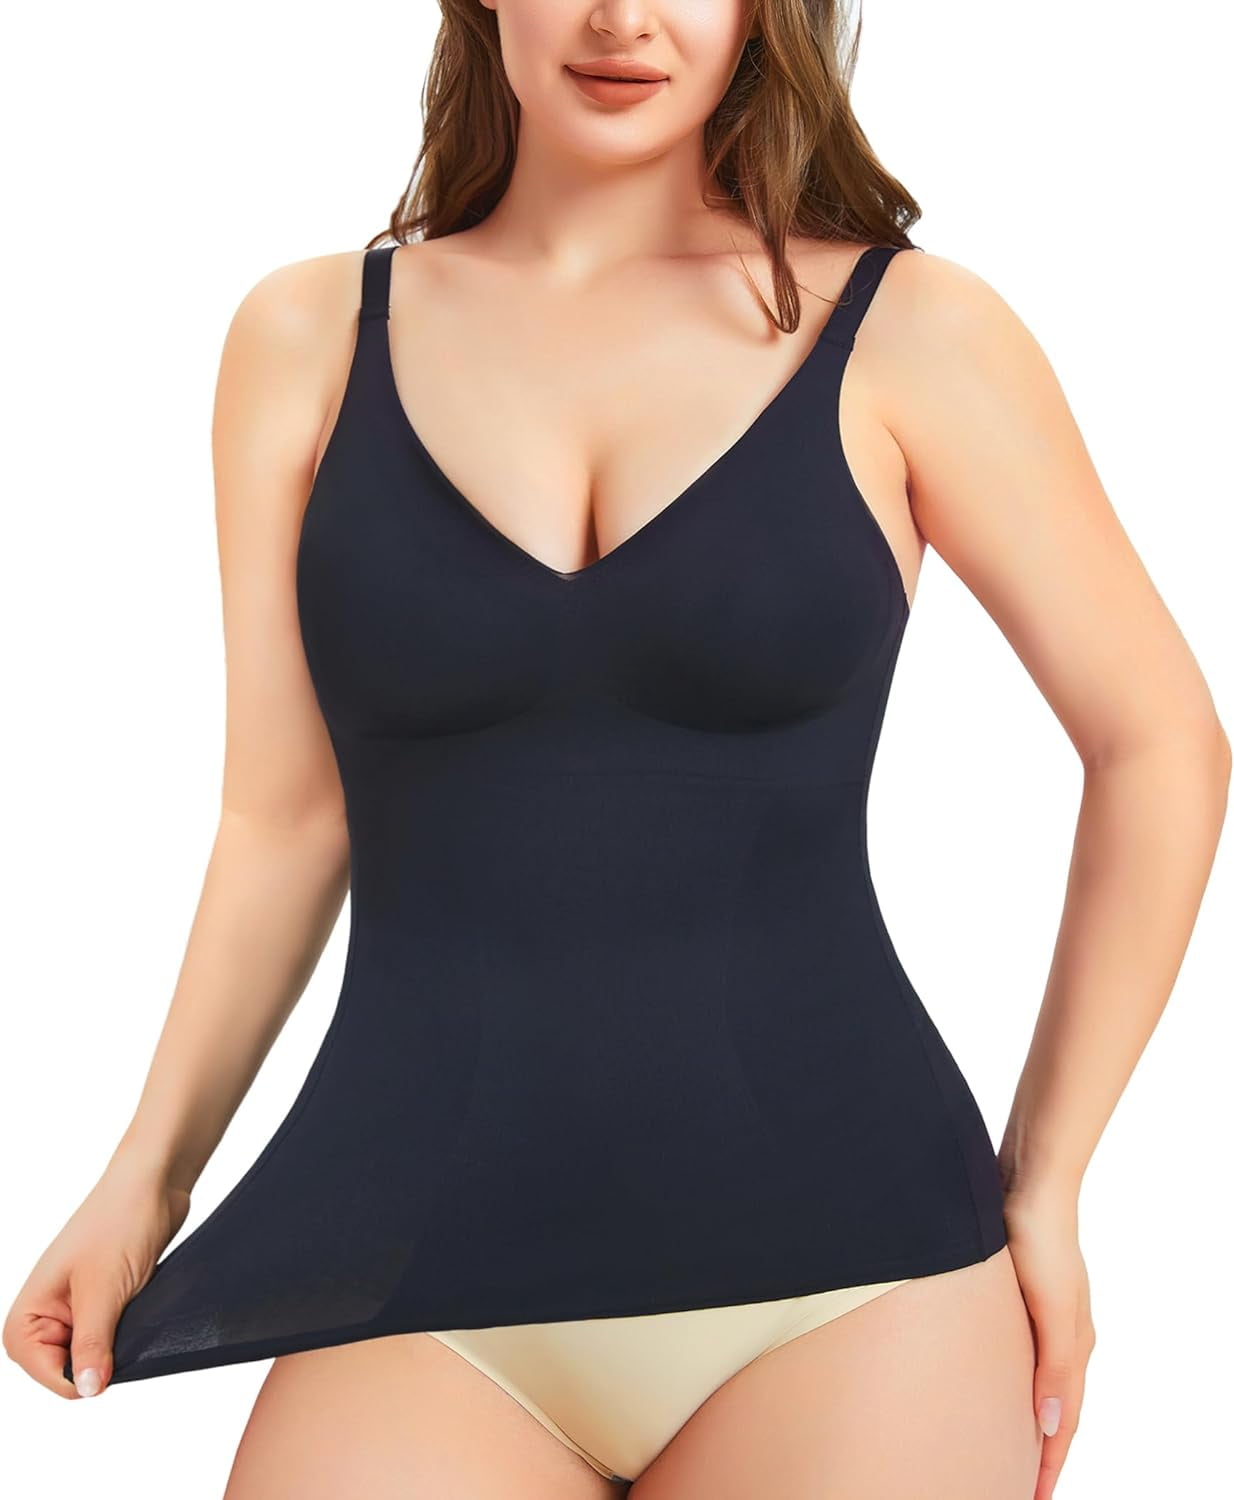 FOCUSSEXY Women Shapewear Tank Tops Tummy Control Camisole Underskirts  Shapewear Body Shaper Slimming Compression Top Vest Plus Size Padded Tank  Top 